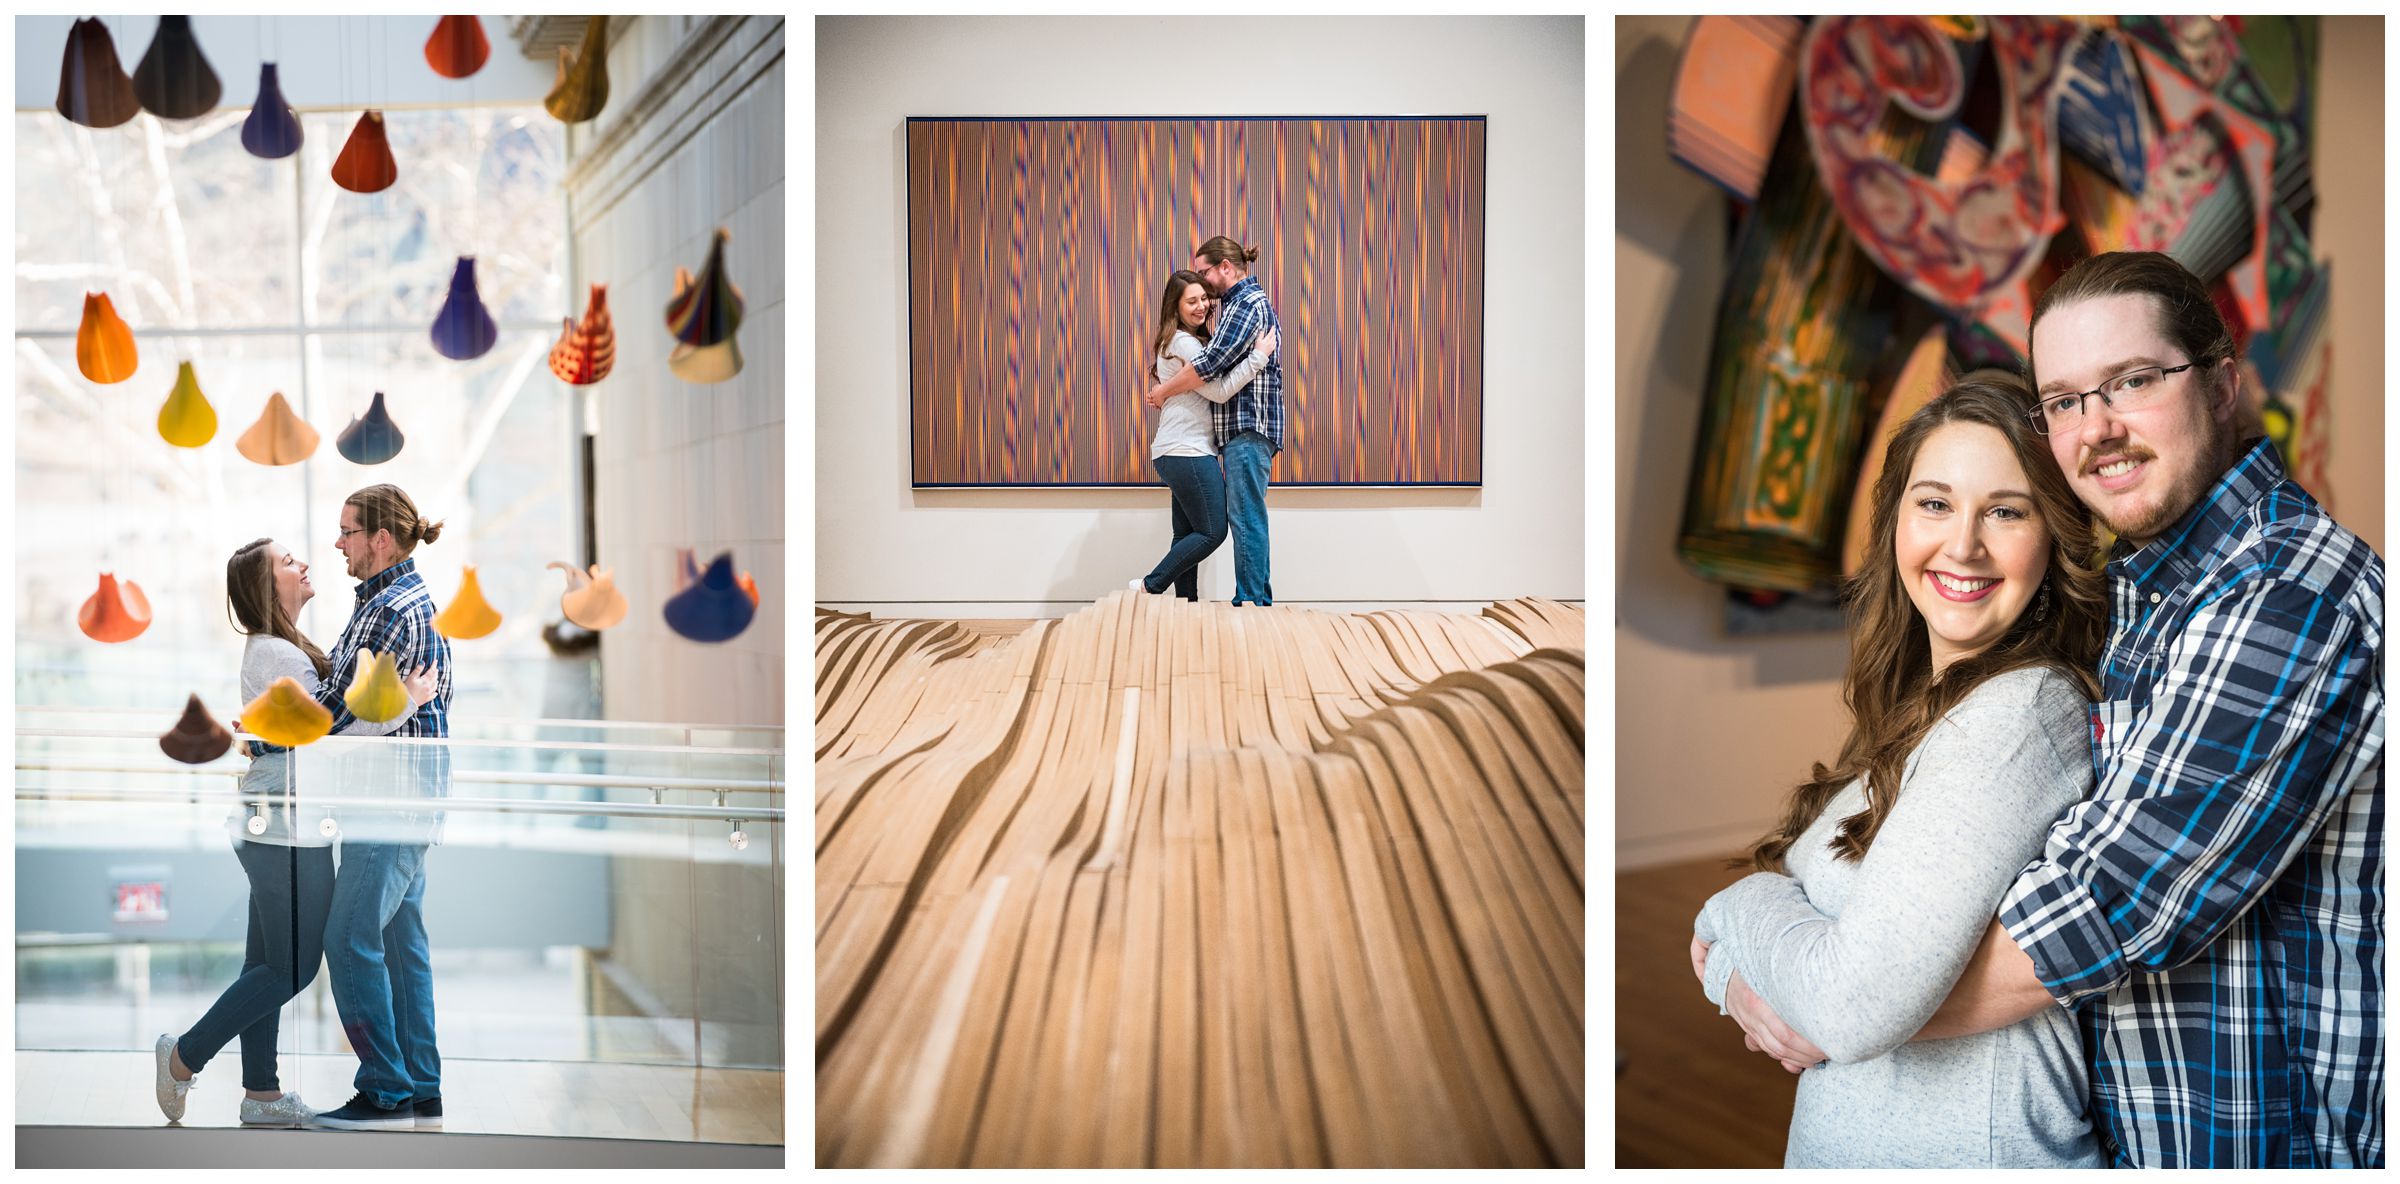 Couple standing near colorful artwork during an indoor winter engagement session at the Columbus Museum of Art